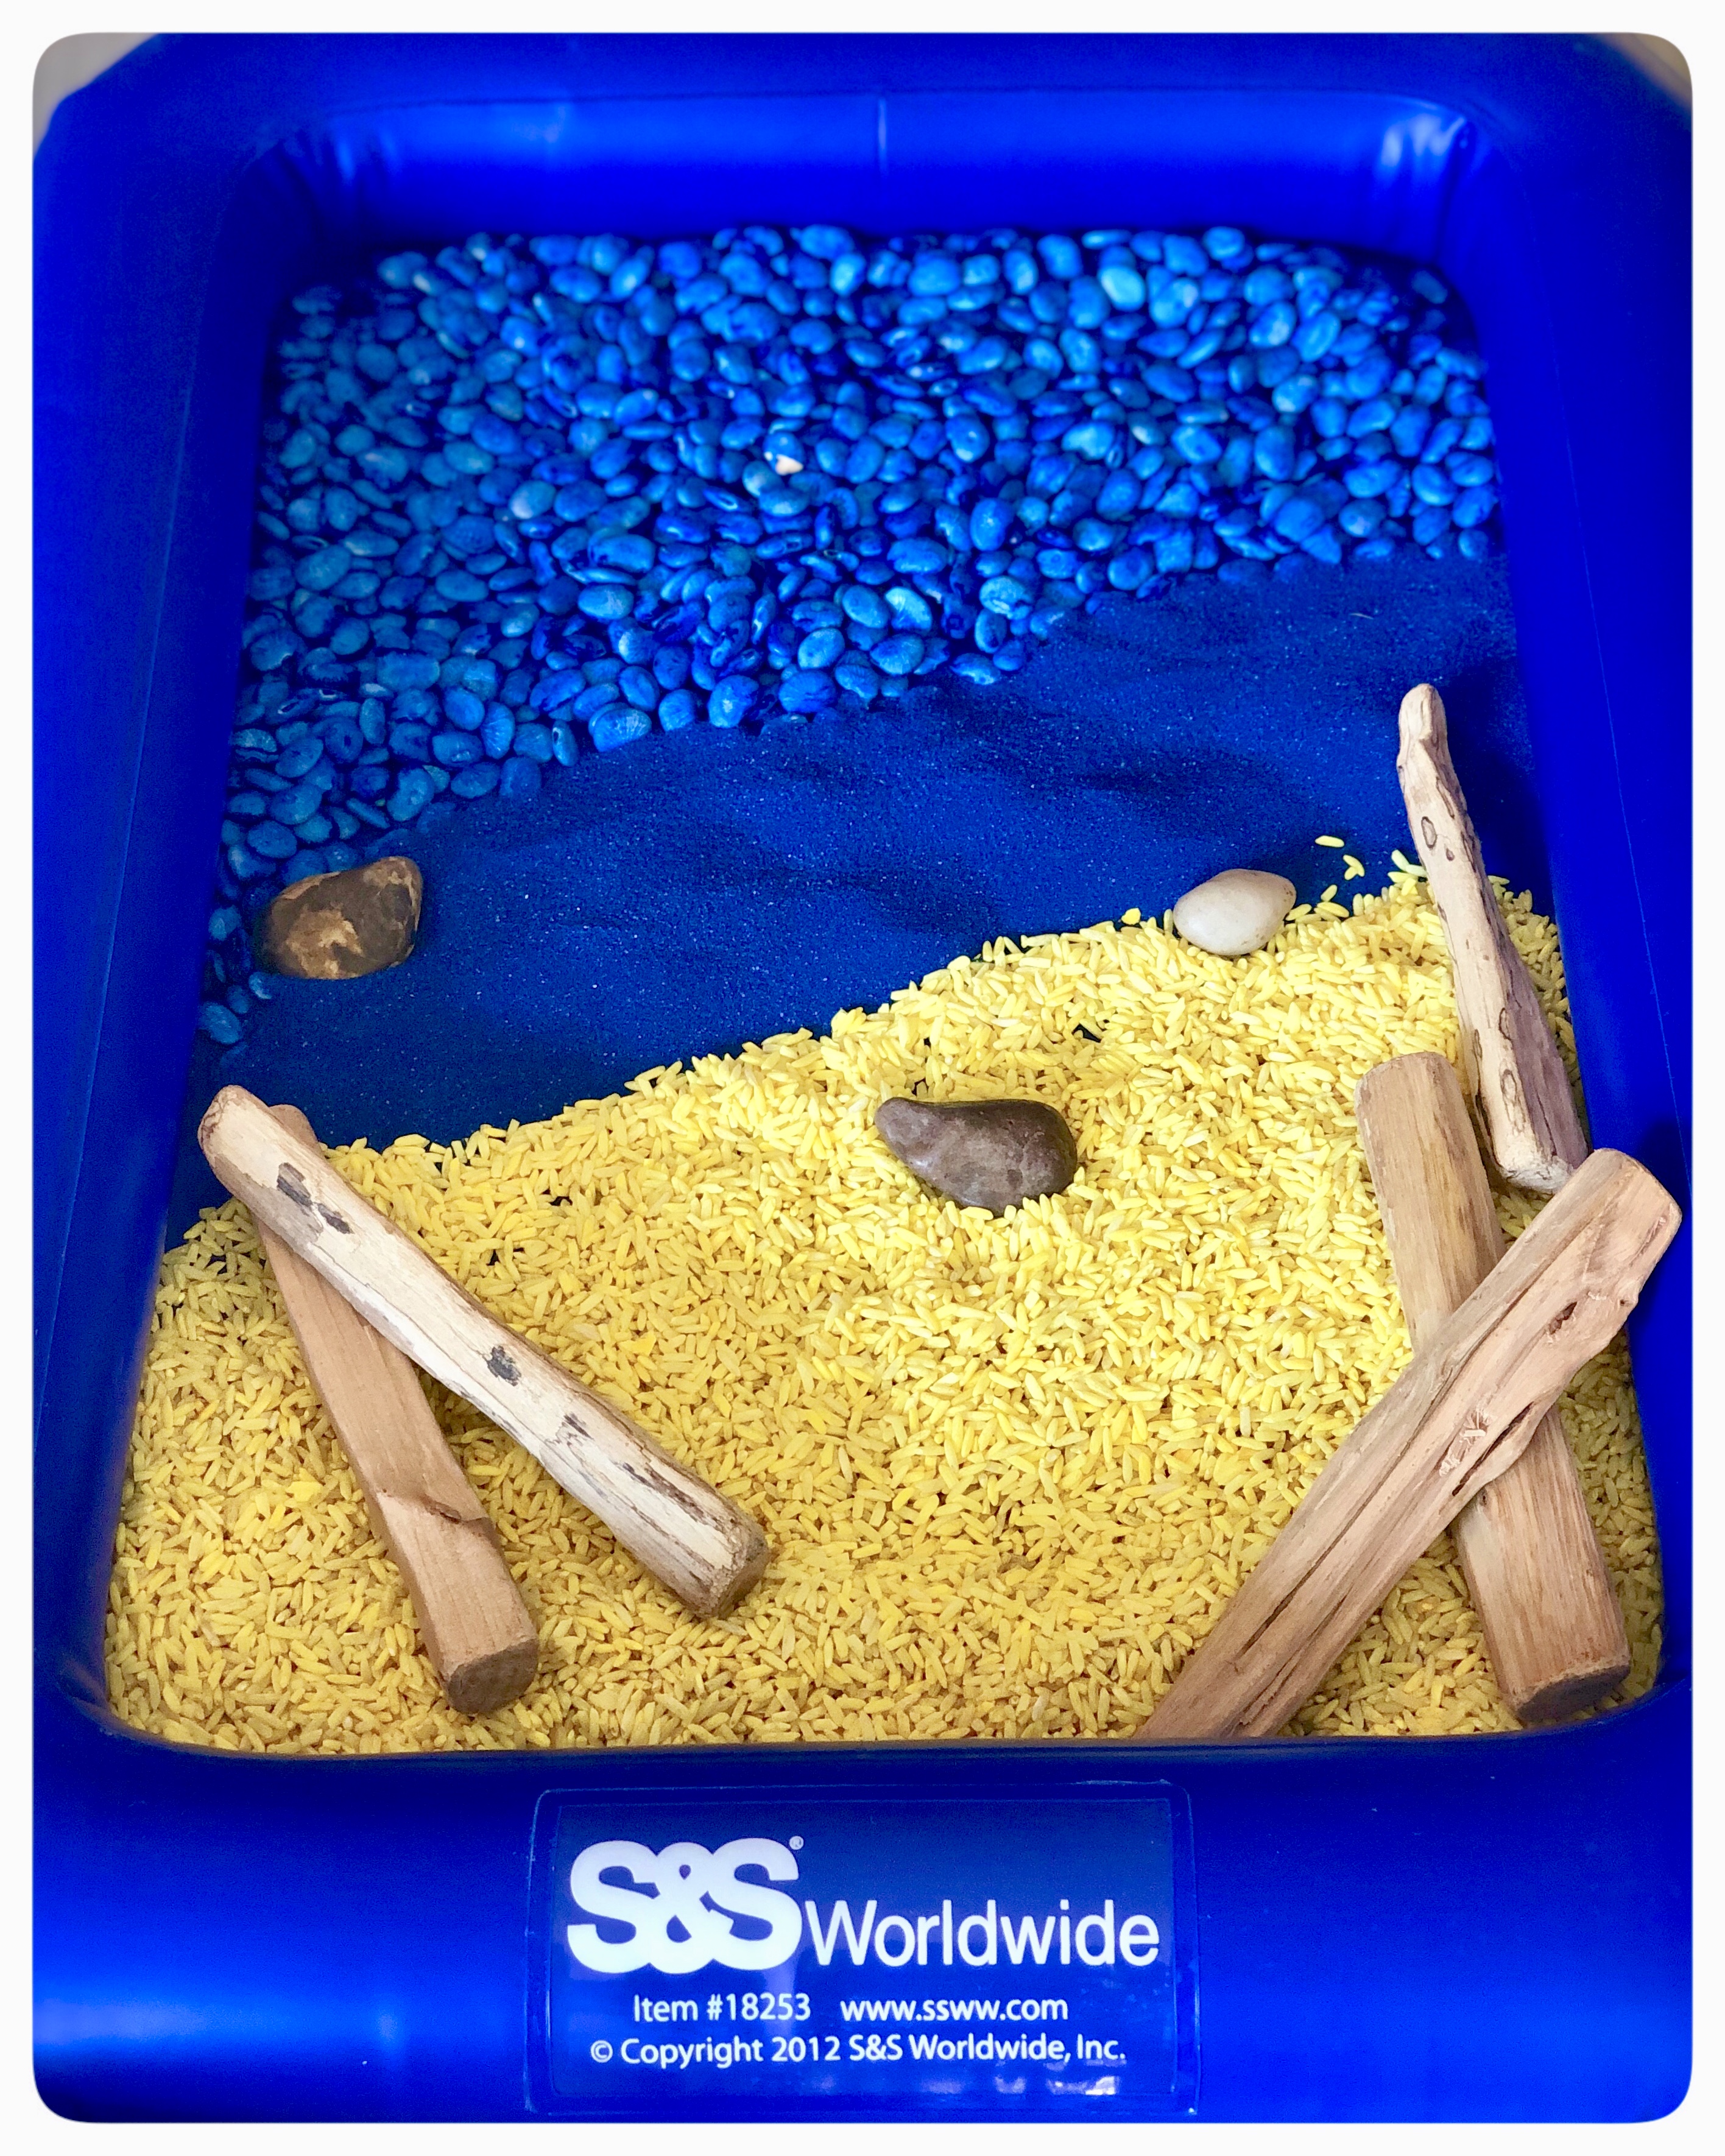 🌊 Ocean Sensory Bin 🐚 .Looking for a fun and simple activity for your kiddos this summer? Create an ocean inspired sensory bin 🐚 Did you know you can dye food you have right now in your kitchen?